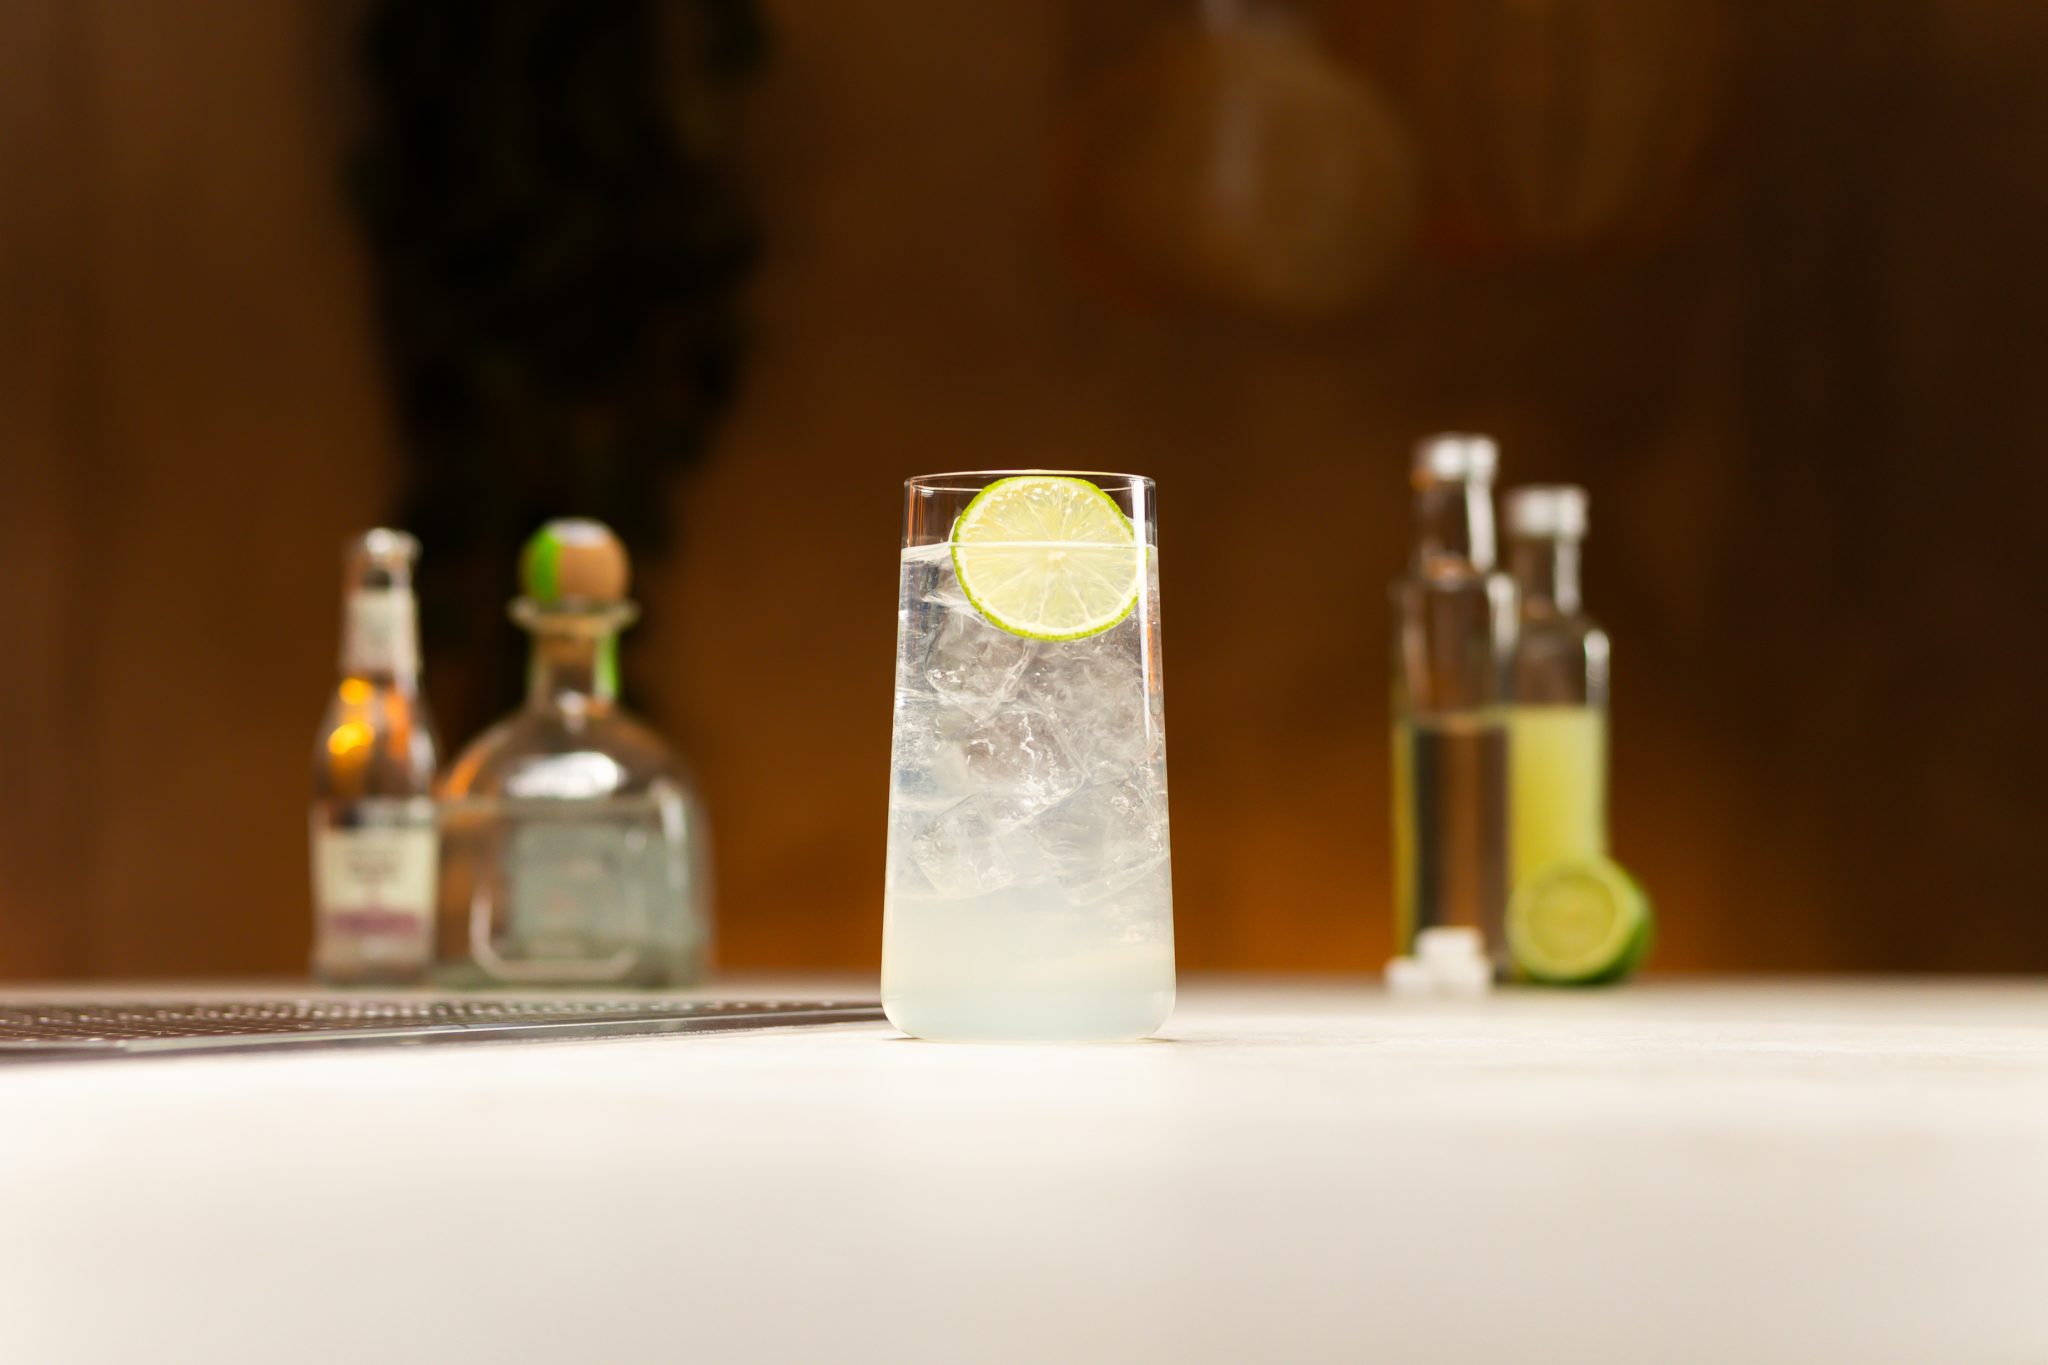 Silver Tequila, lime juice, simple syrup, soda, sugar cubes and lime laid out on a white bar table